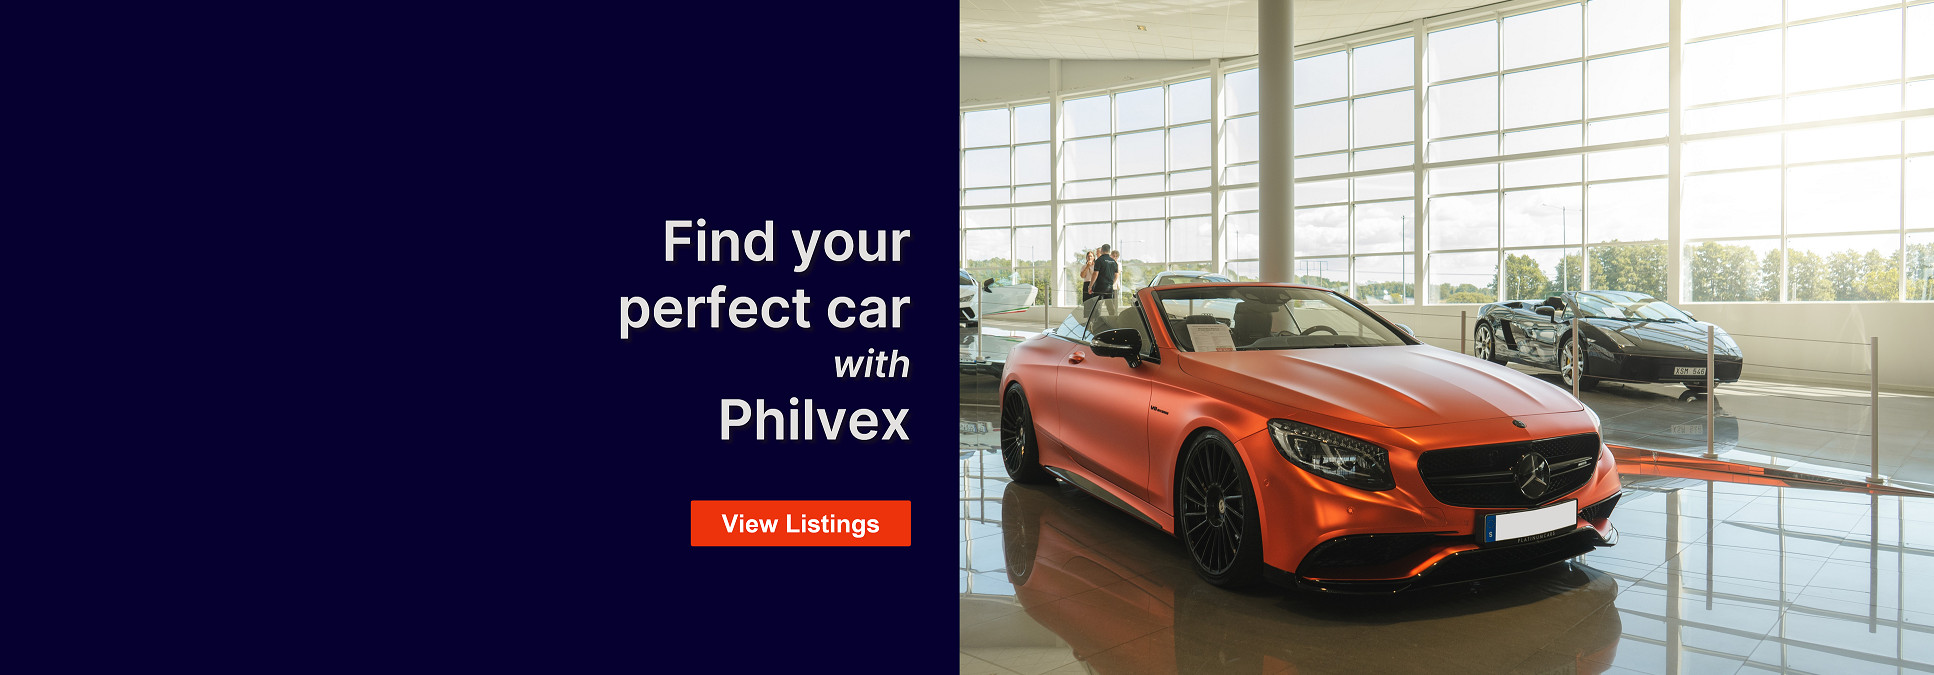 Find your perfect car with Philvex